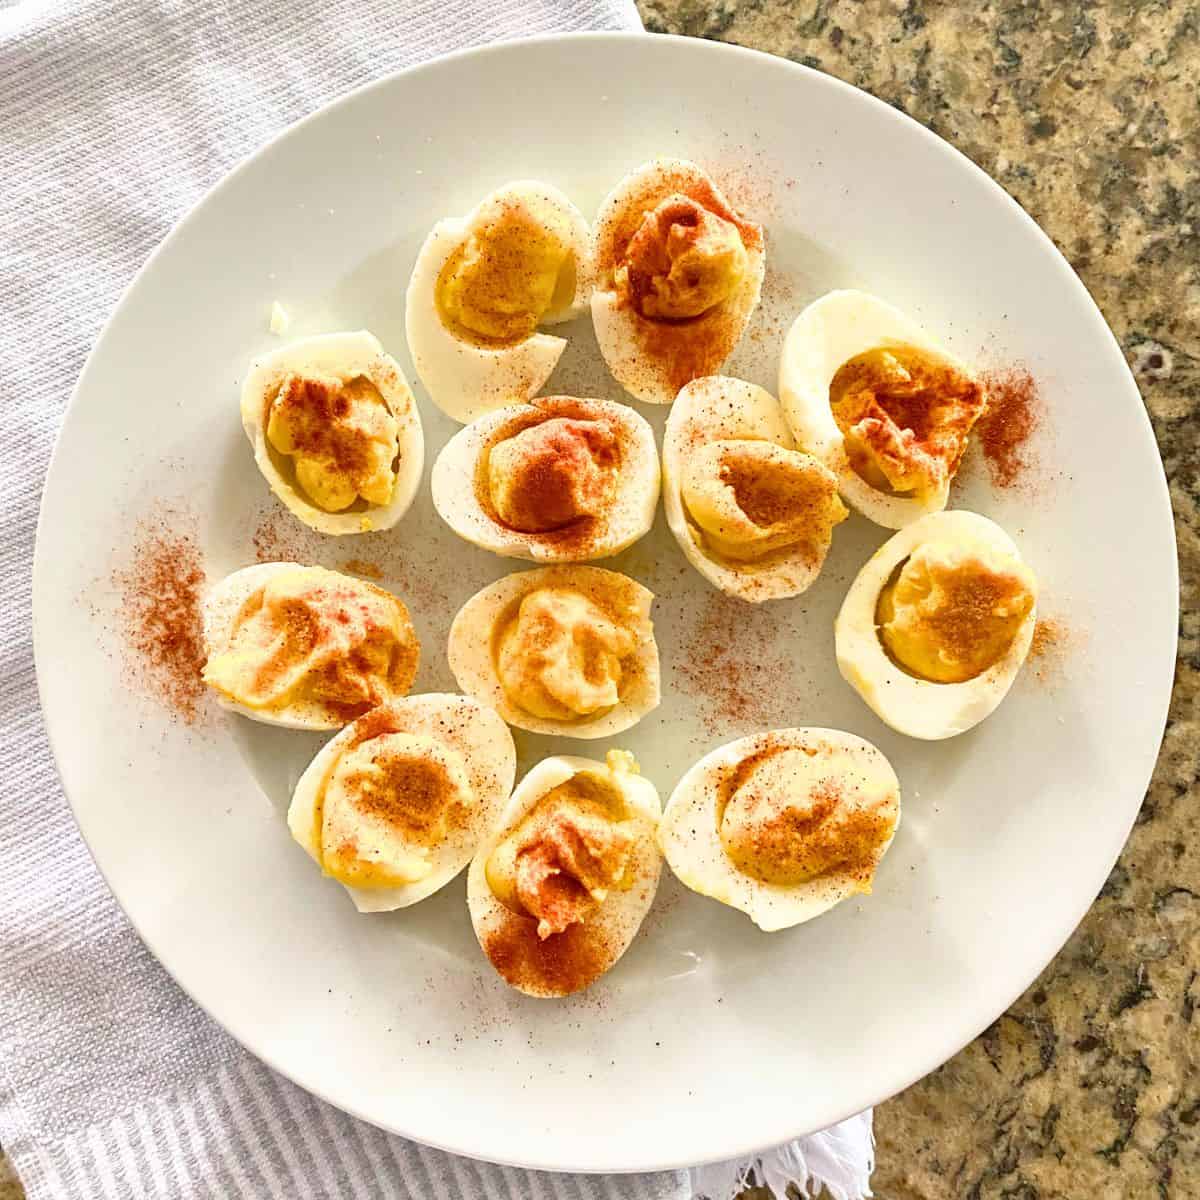 Deviled eggs presented on a white plate